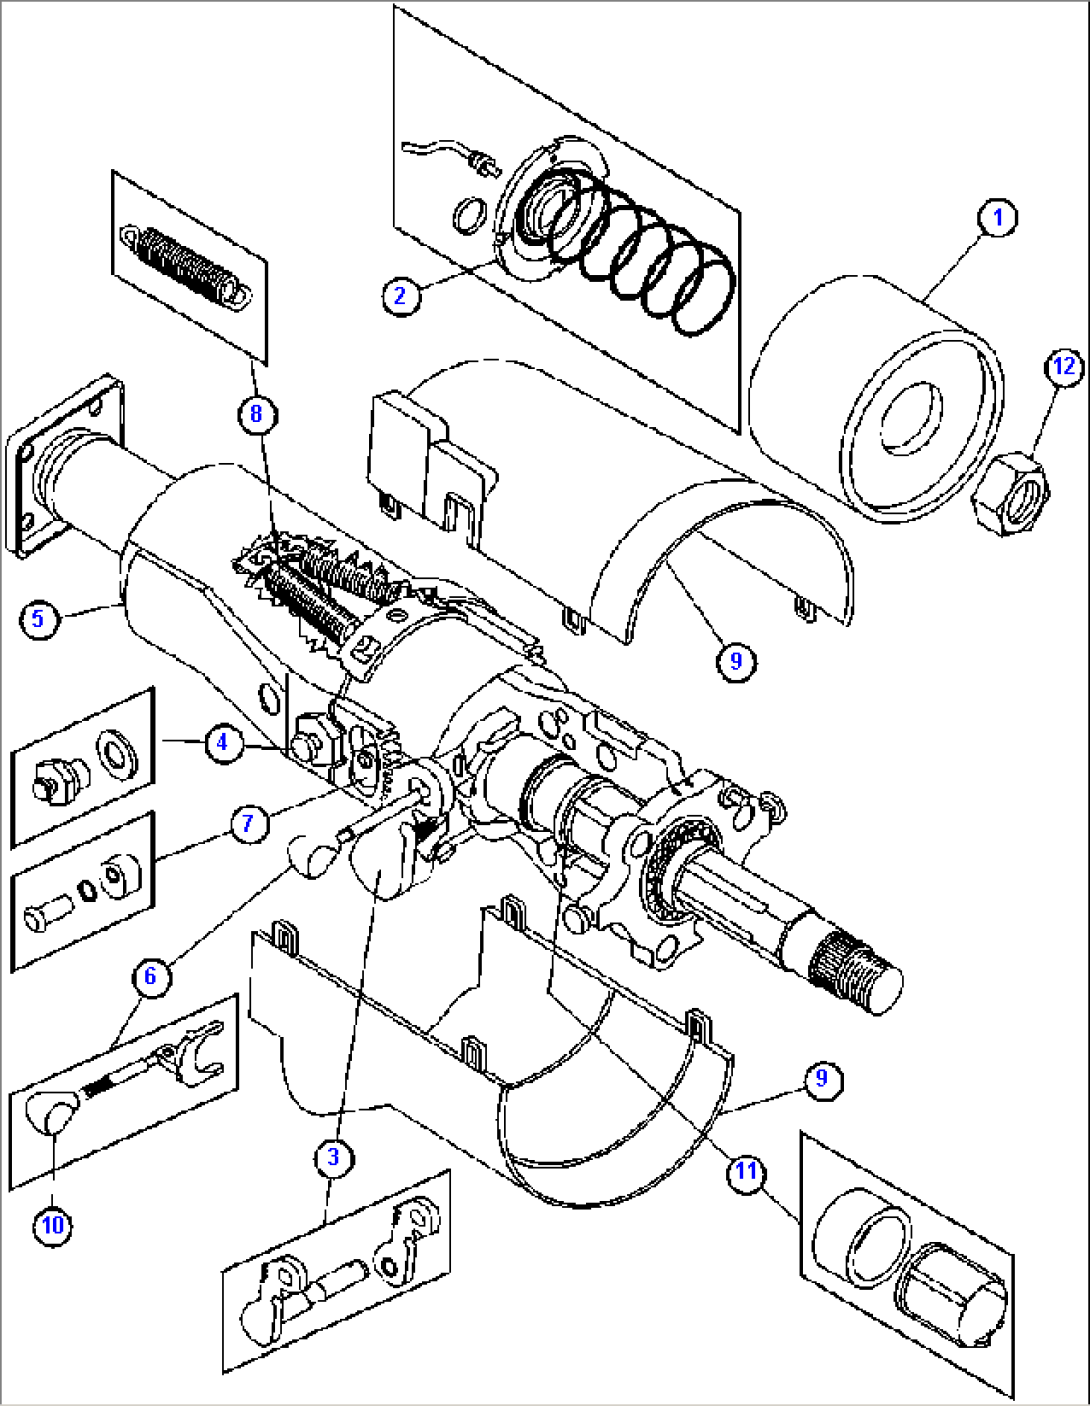 STEERING COLUMN ASSEMBLY PC1287(1) (PC1447(2))